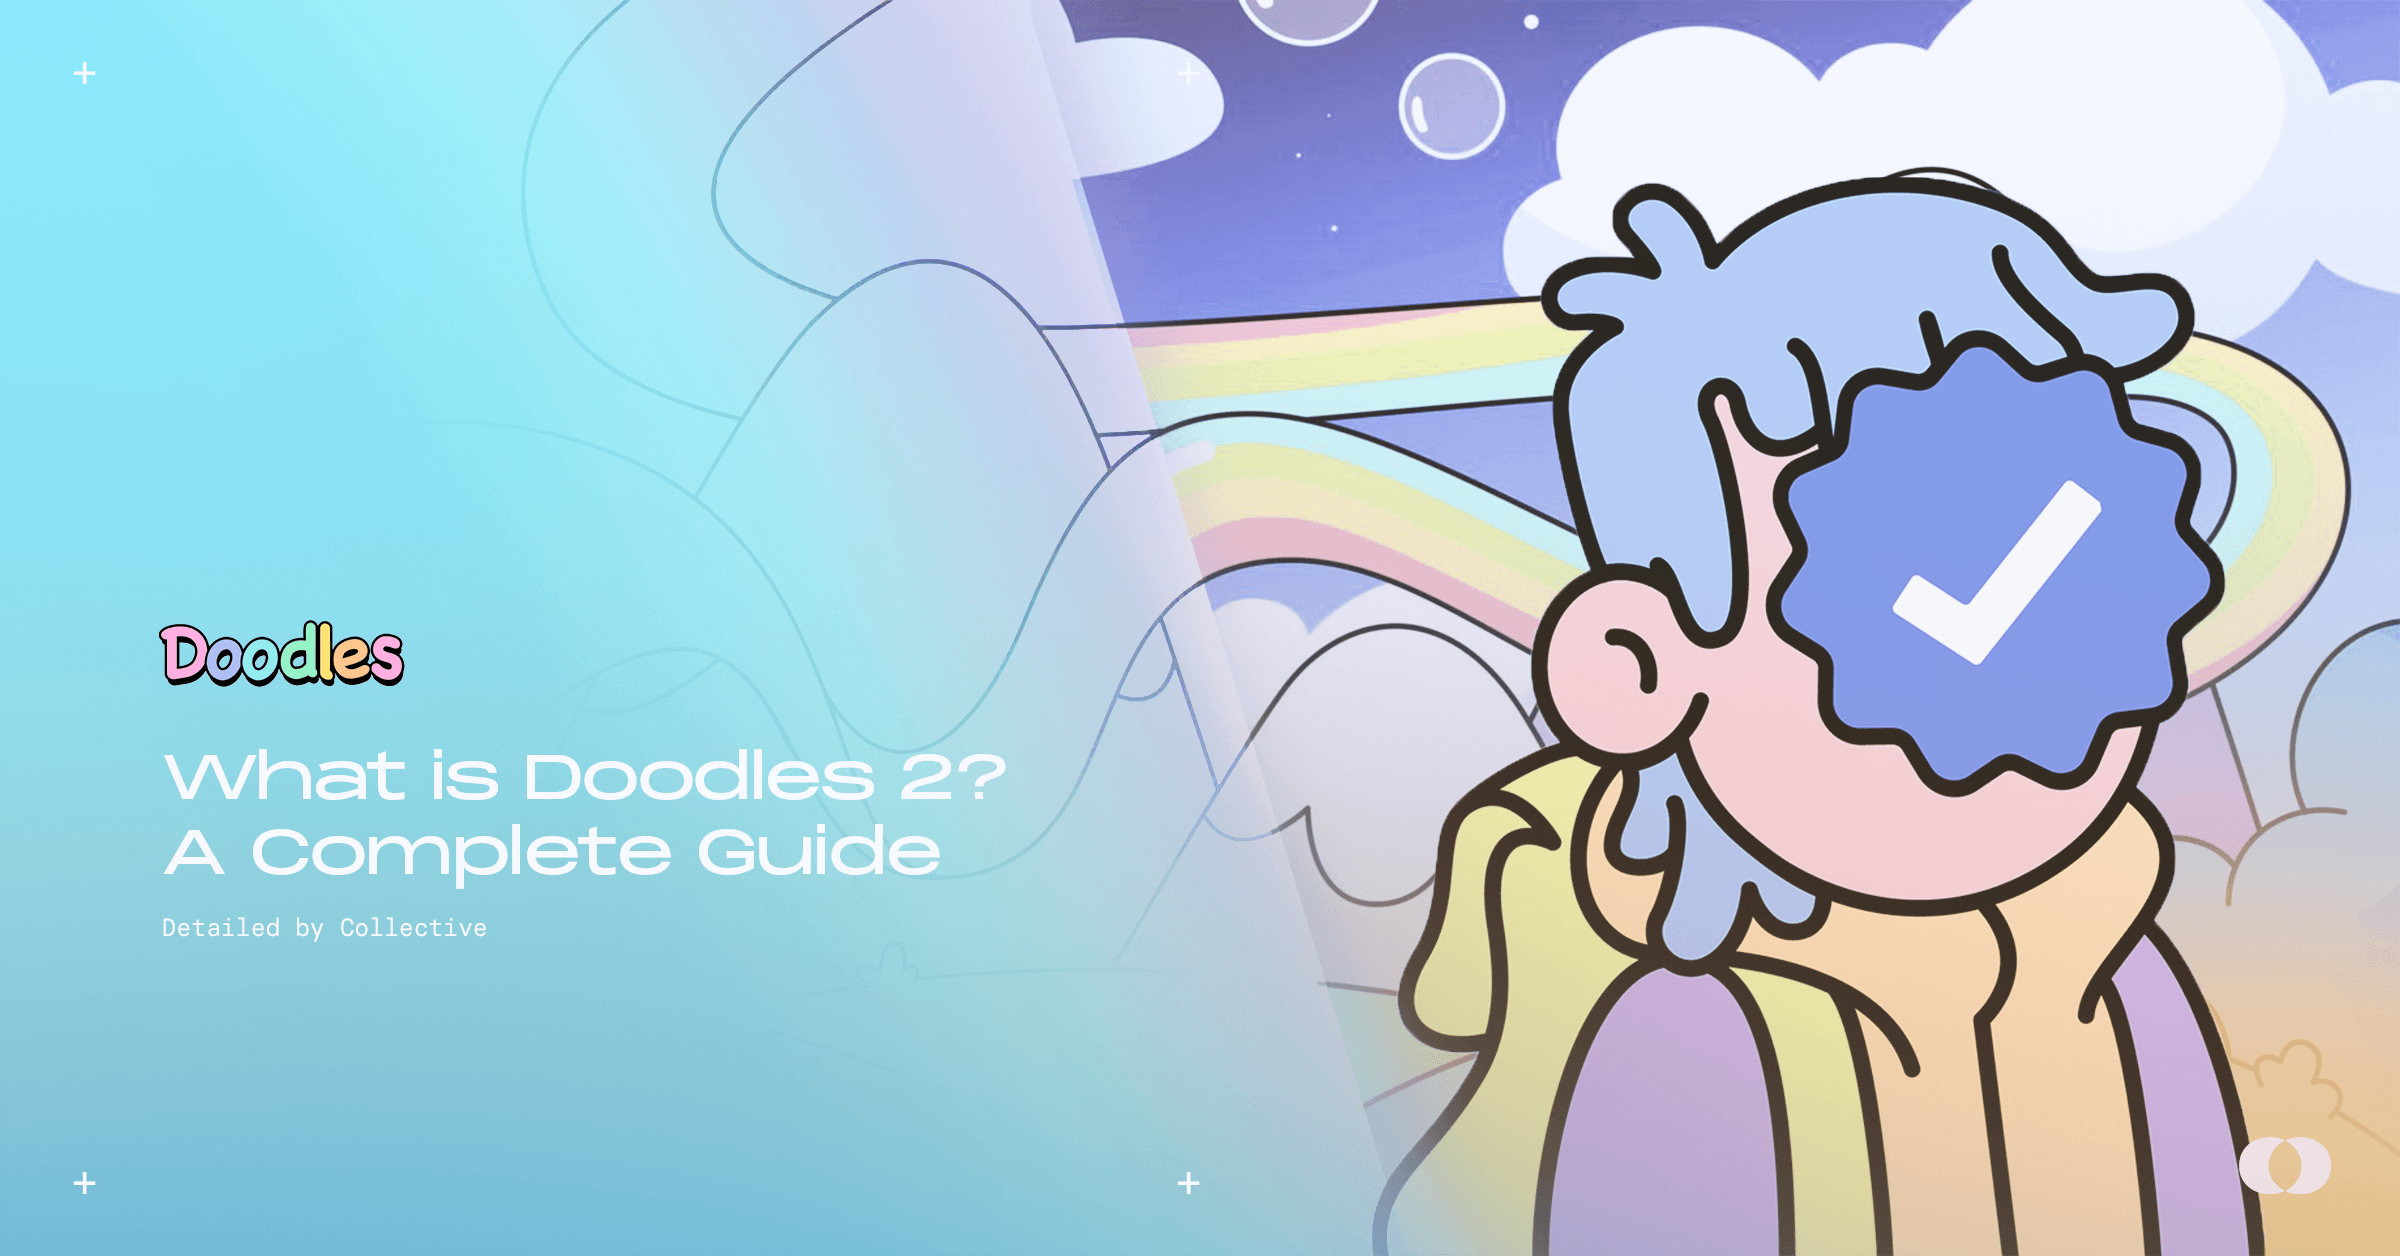 A Guide to Doodles 2: Expanding the Doodles Universe